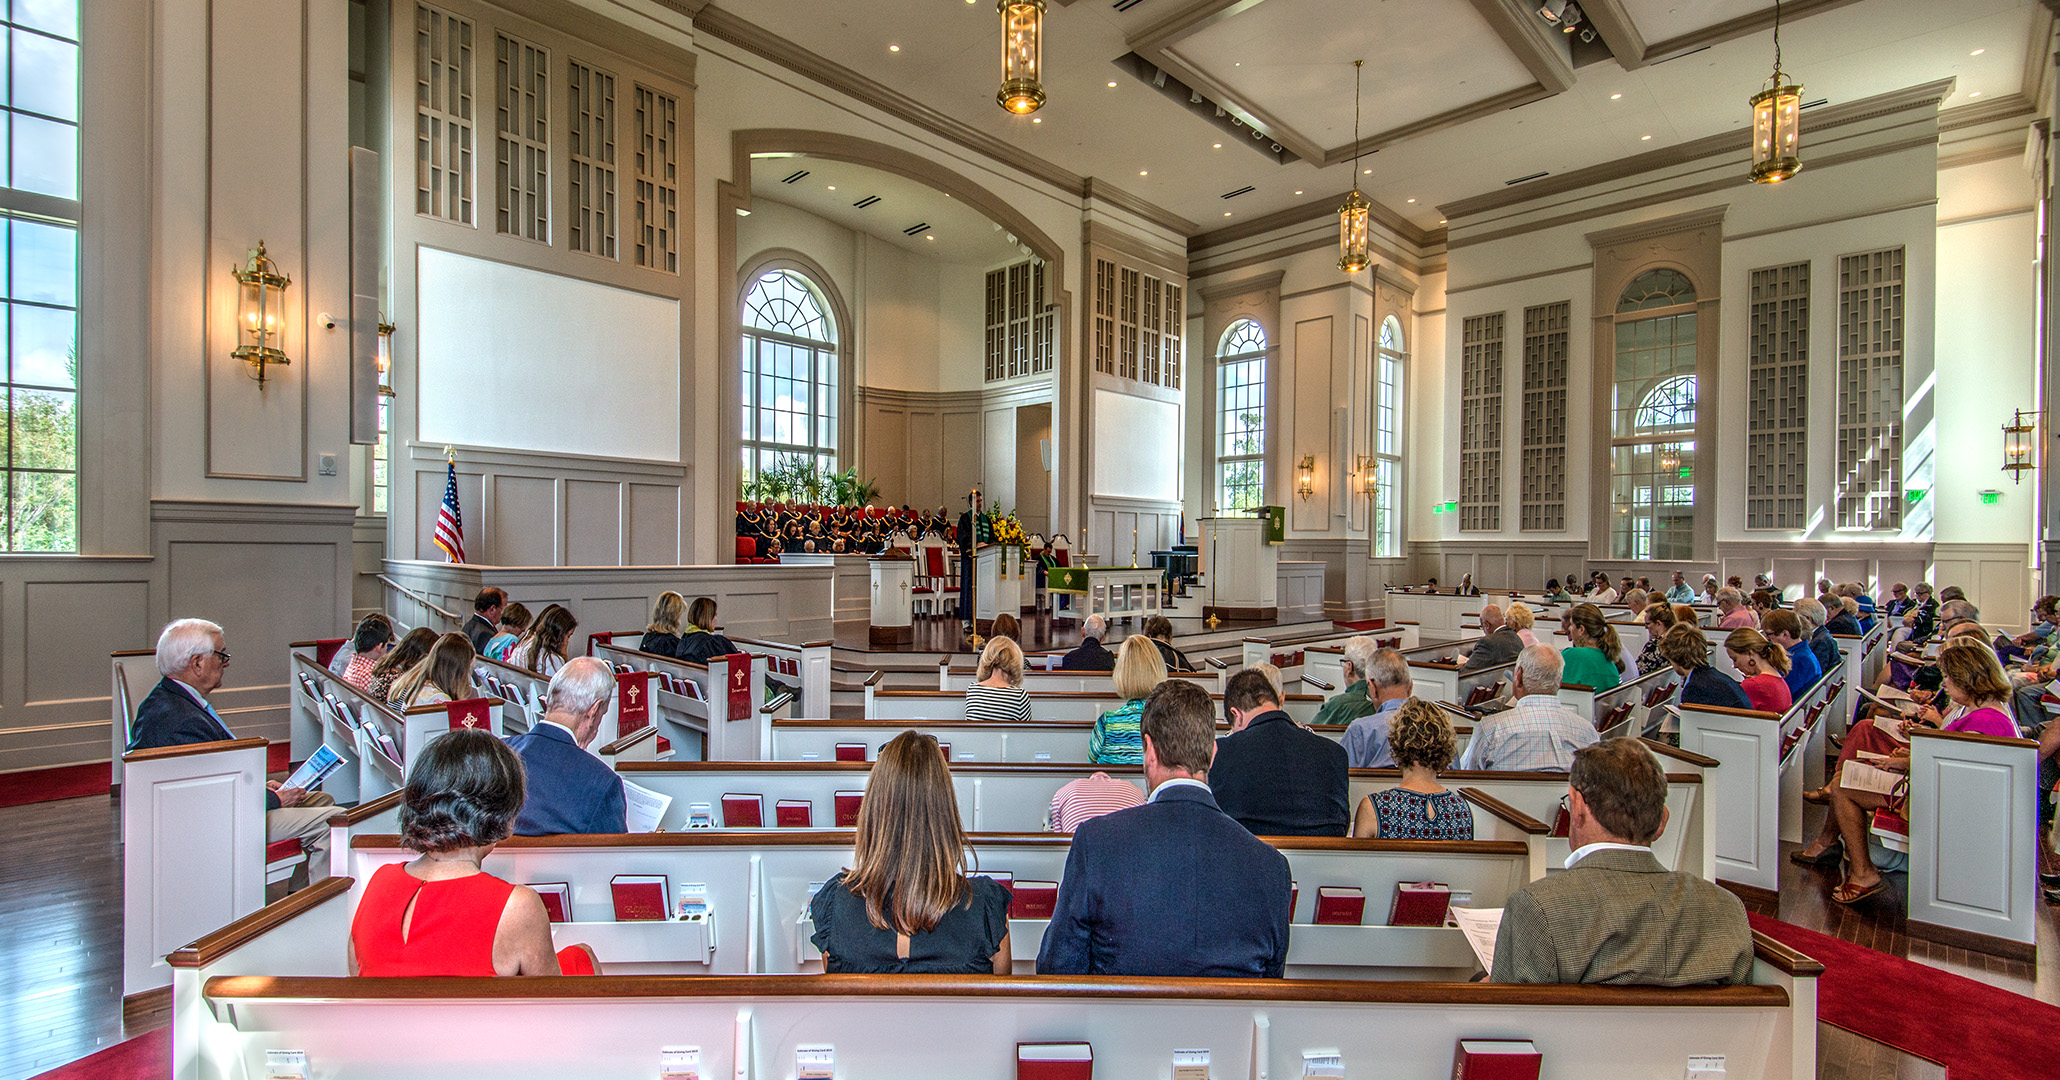 BOUDREAUX architects designed the new sanctuary at the First Presbyterian Church in Myrtle Beach.